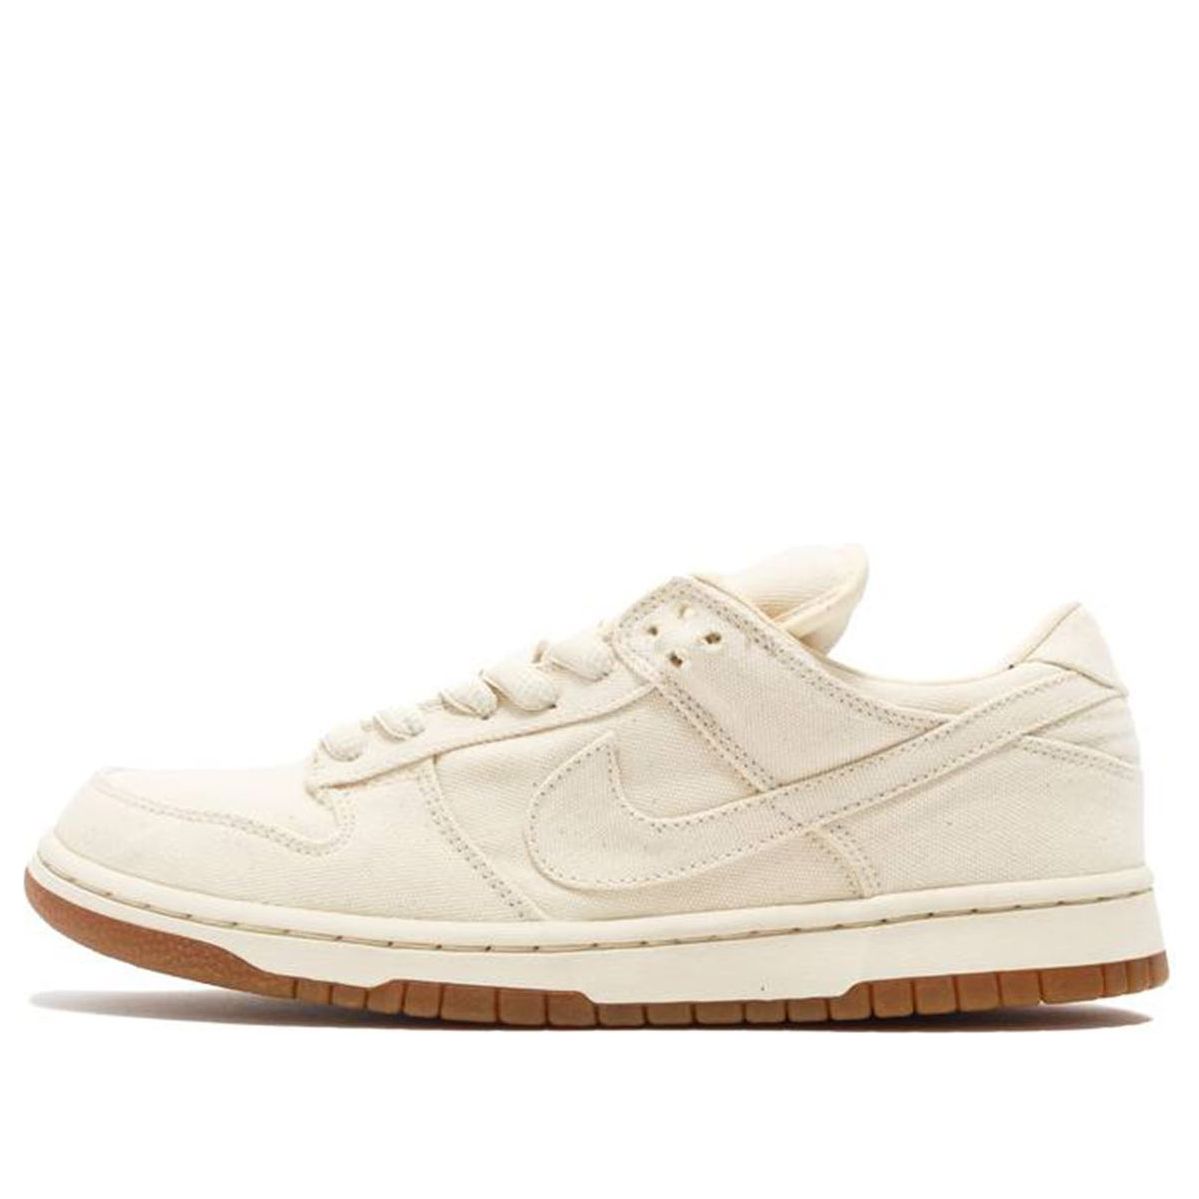 Nike Dunk Low Pro SB 'Tokyo'  308268-111 Iconic Trainers